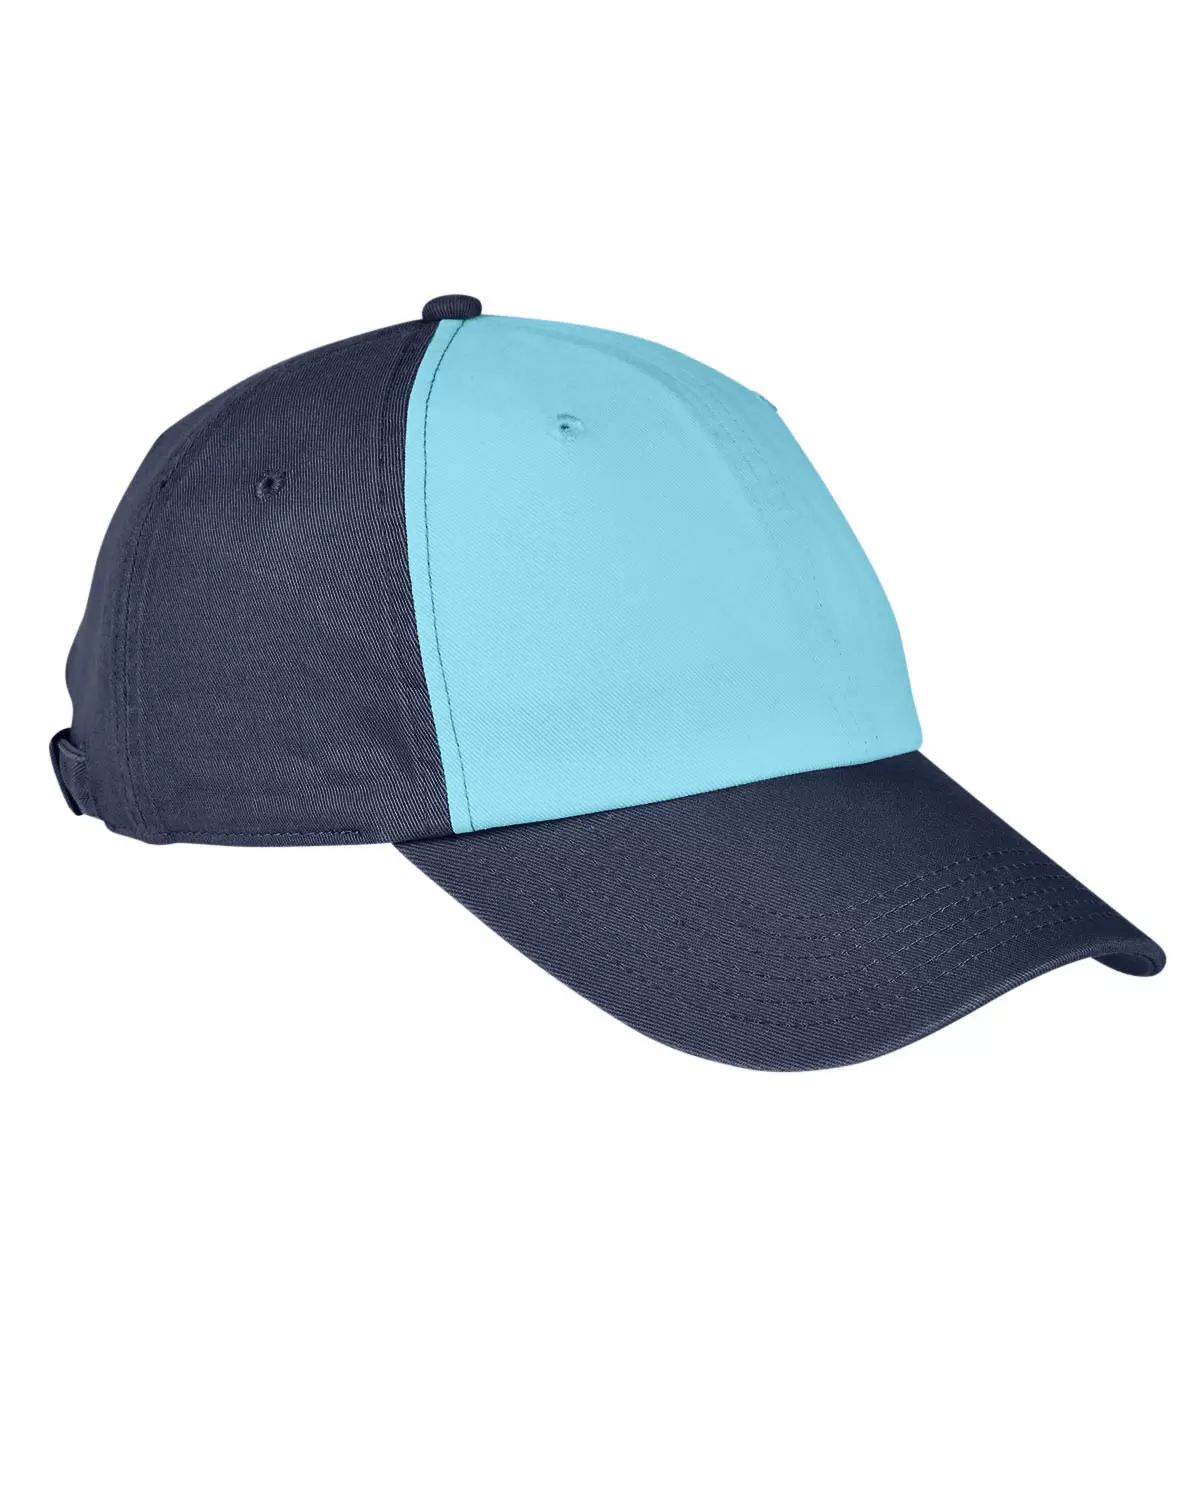 Big Accessories BA650 100% Washed From Cotton Twill - Cap Baseball